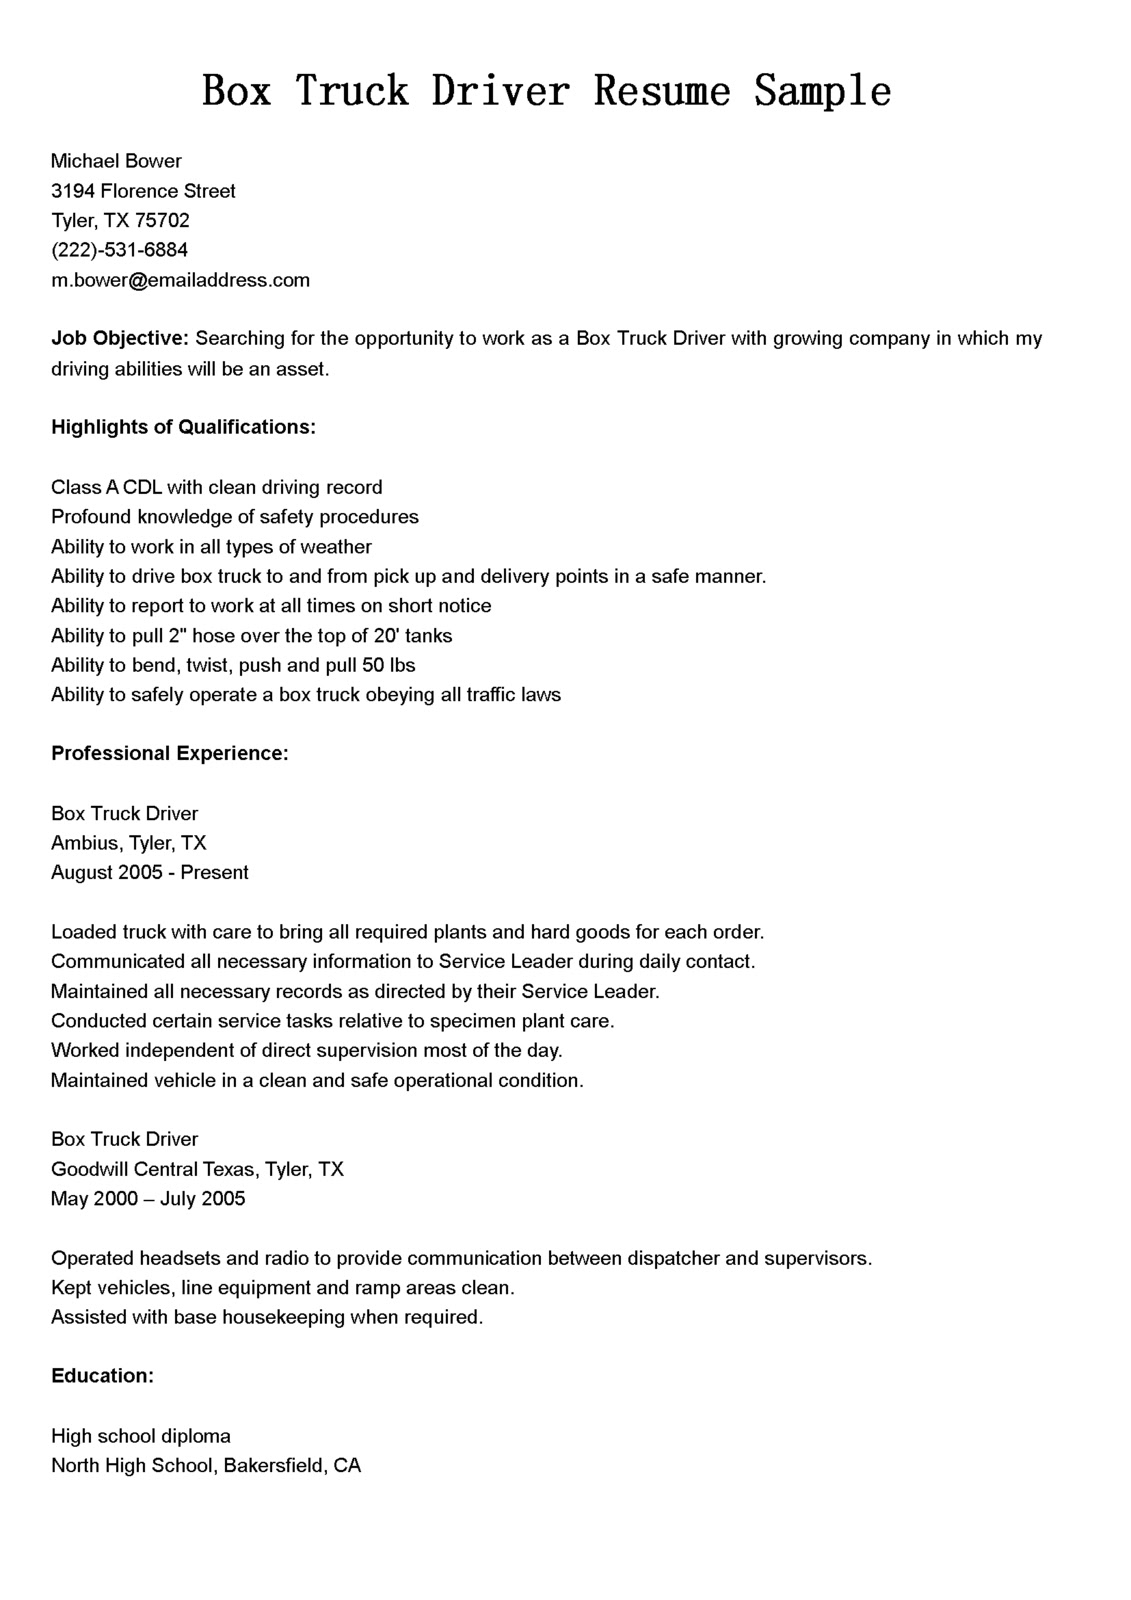 Cover letter sample library director